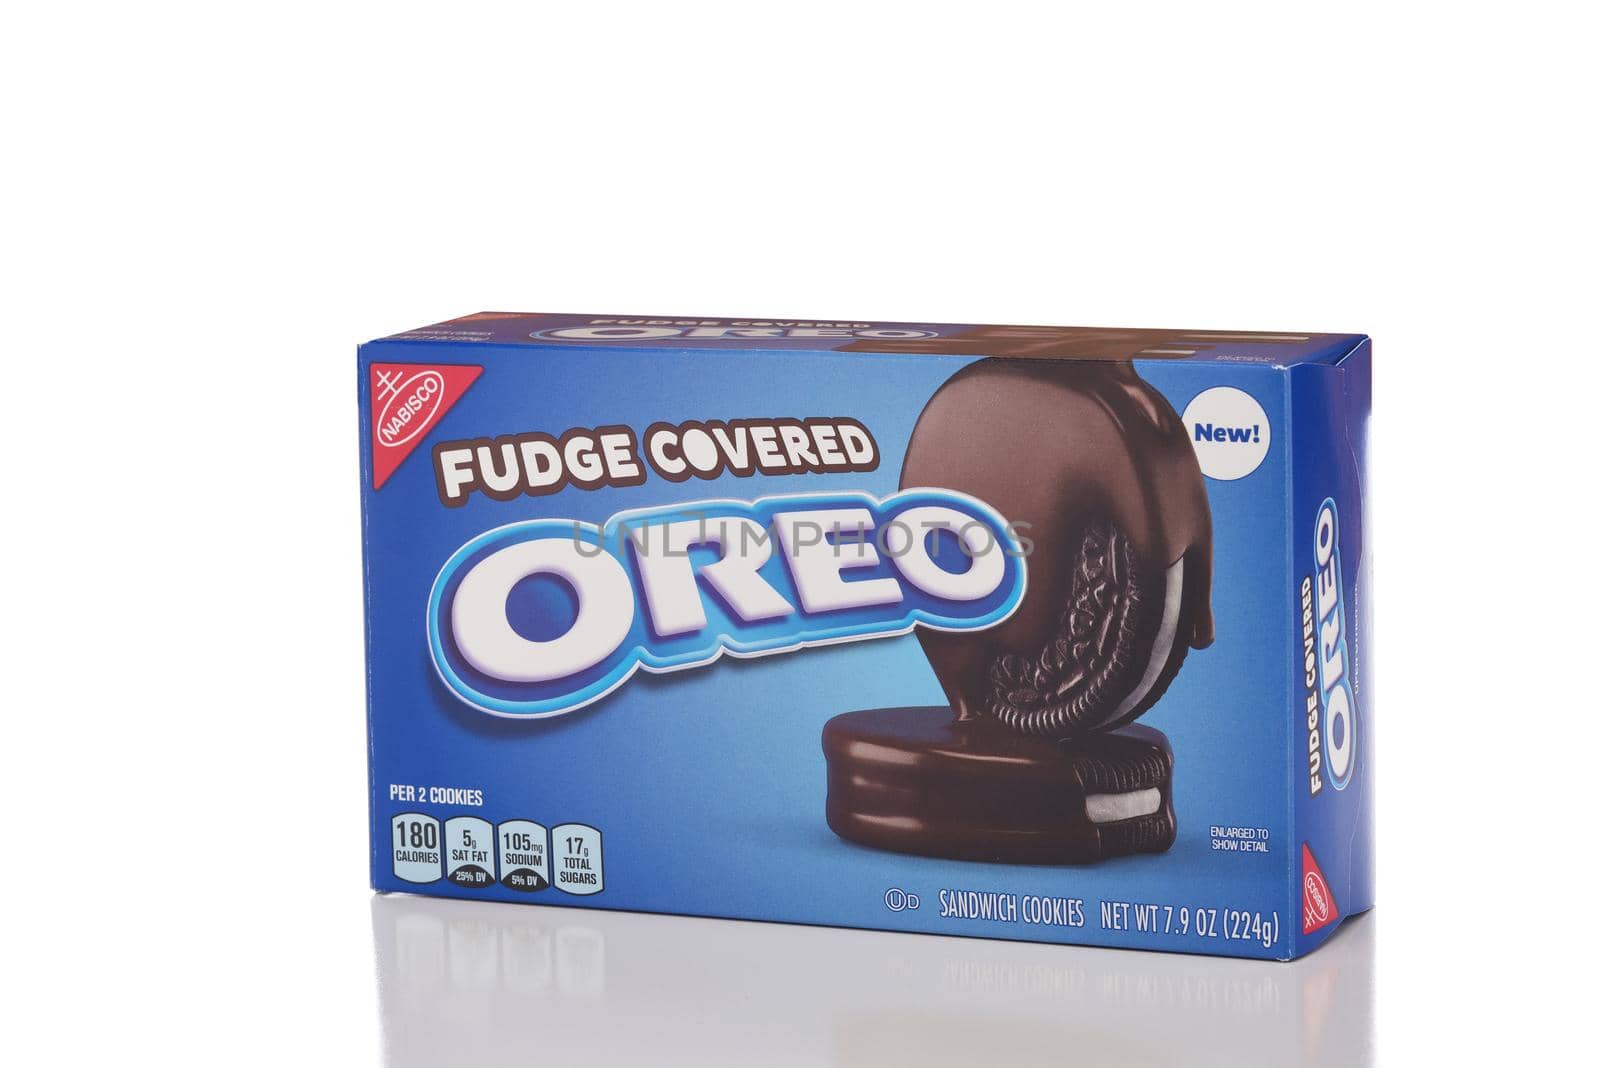 IRVINE, CALIFORNIA - APRIL 30, 2019: A package of Nabisco Fudge Covered Oreo sandwich cookies. 